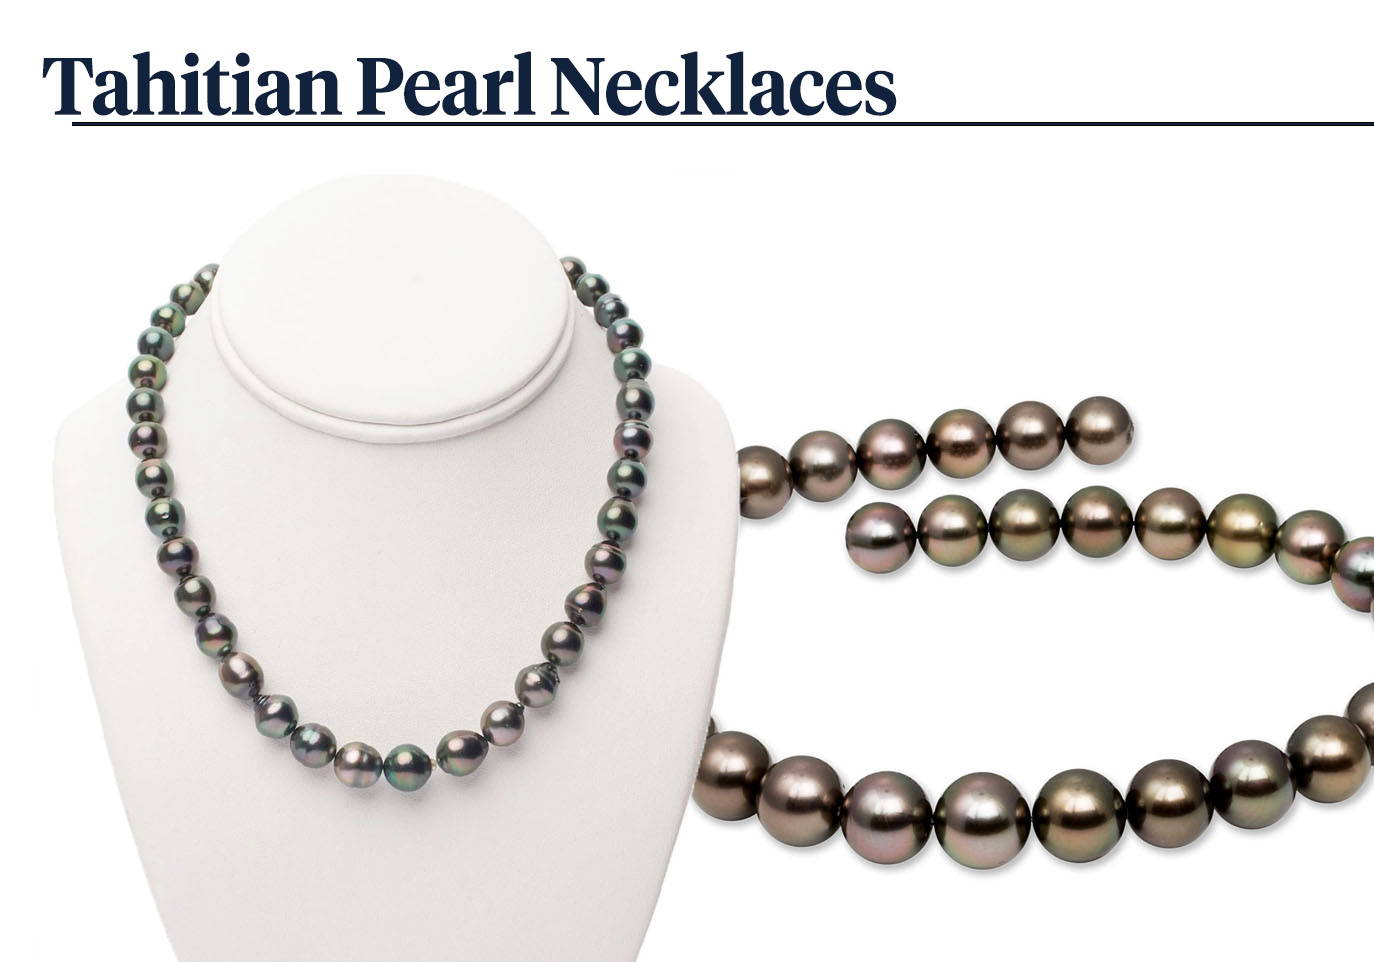 Tahitian Pearl Jewelry Styles: Pearl Necklaces